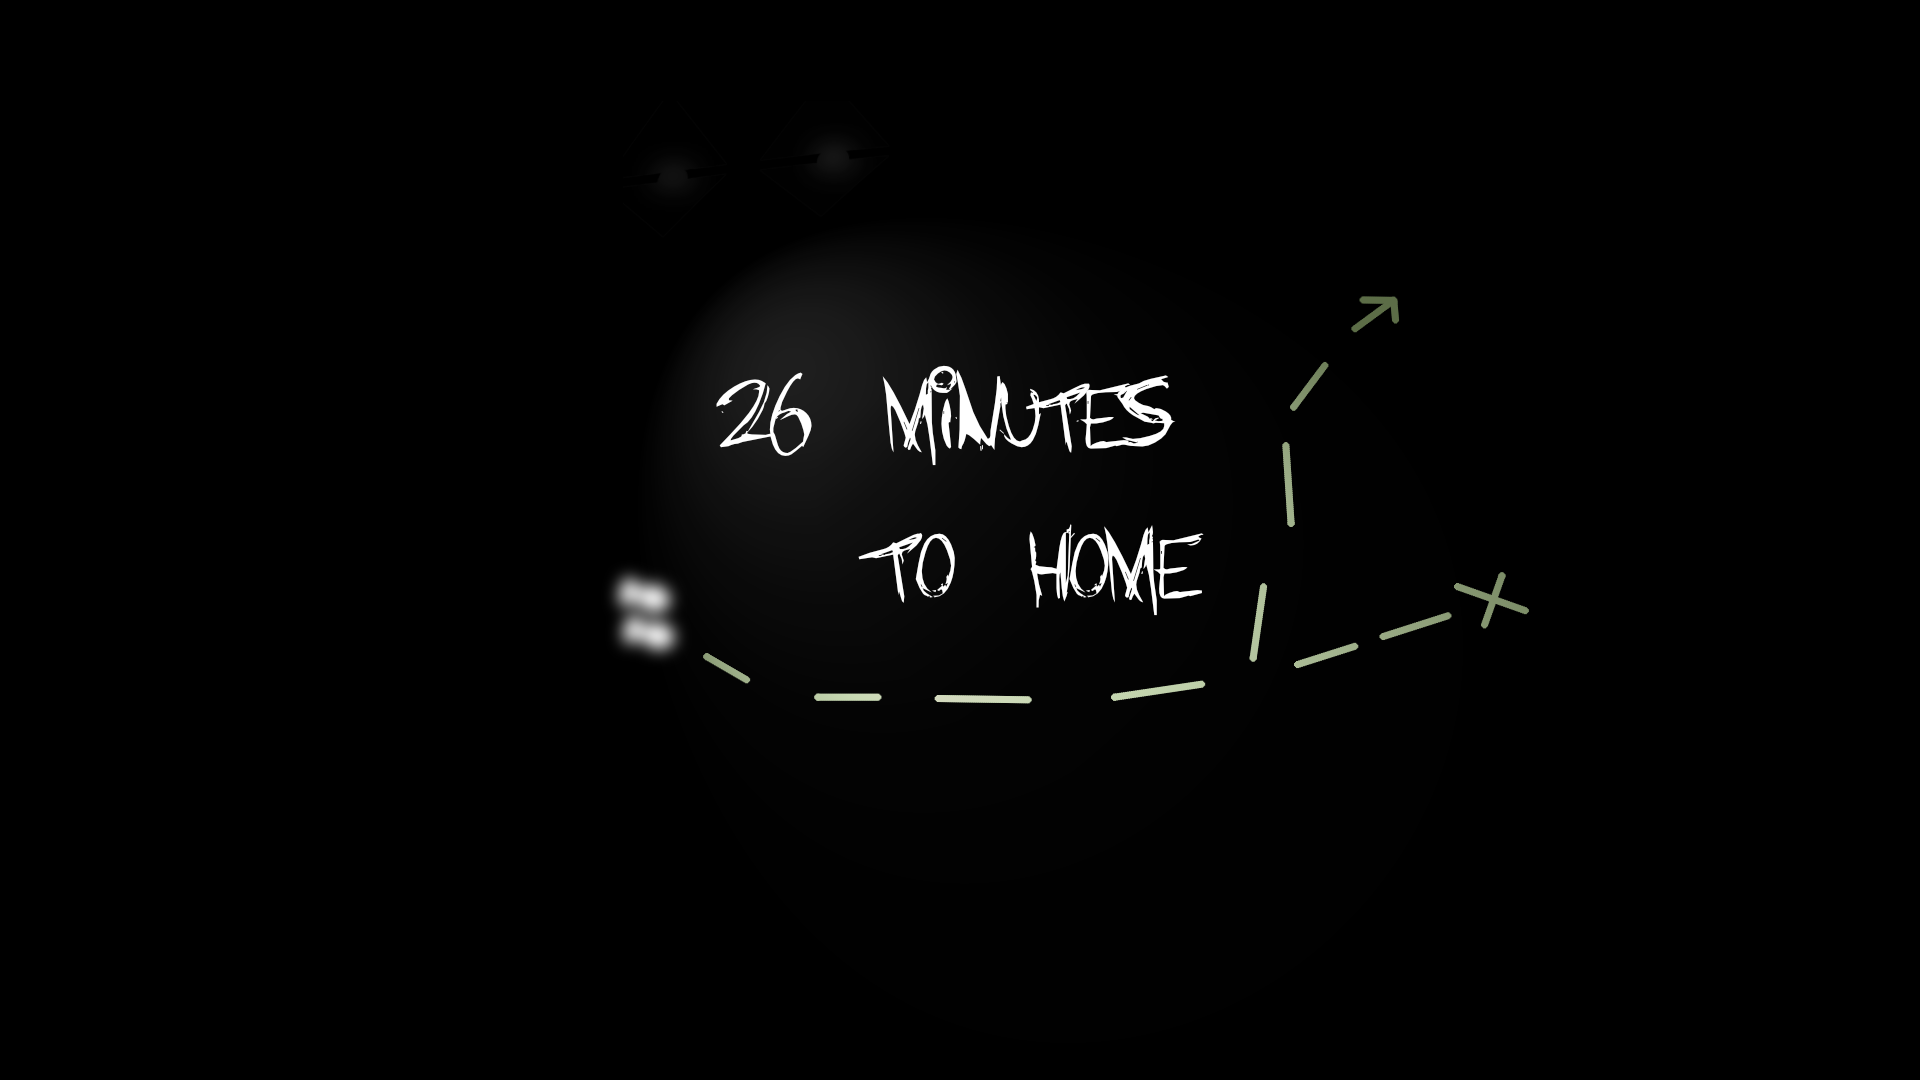 26 Minutes to Home - Short Stories